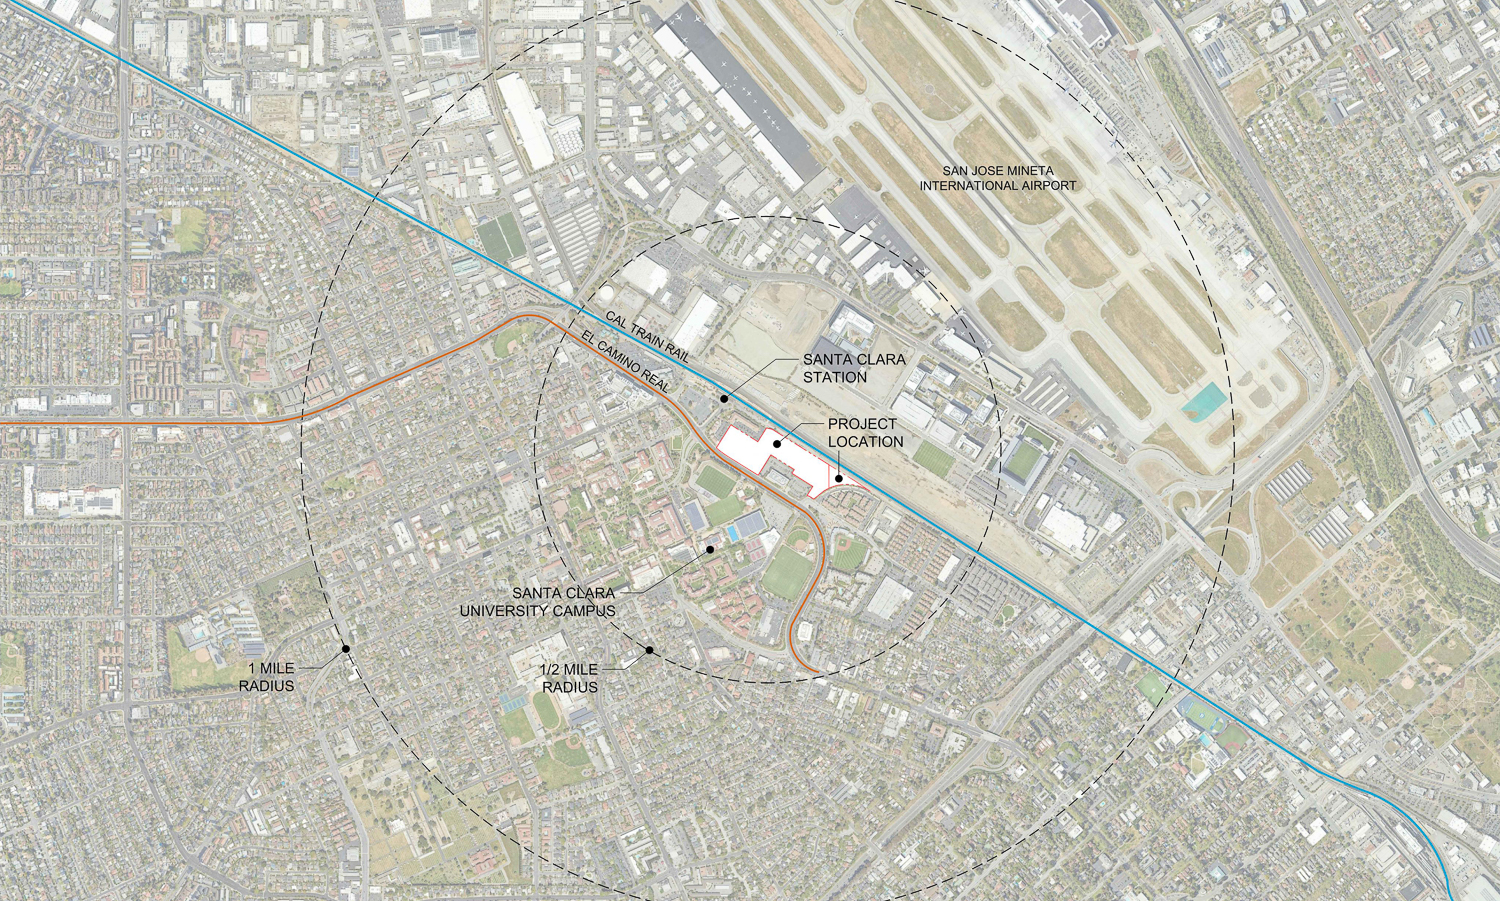 University Station area context, image courtesy the Morley Bros